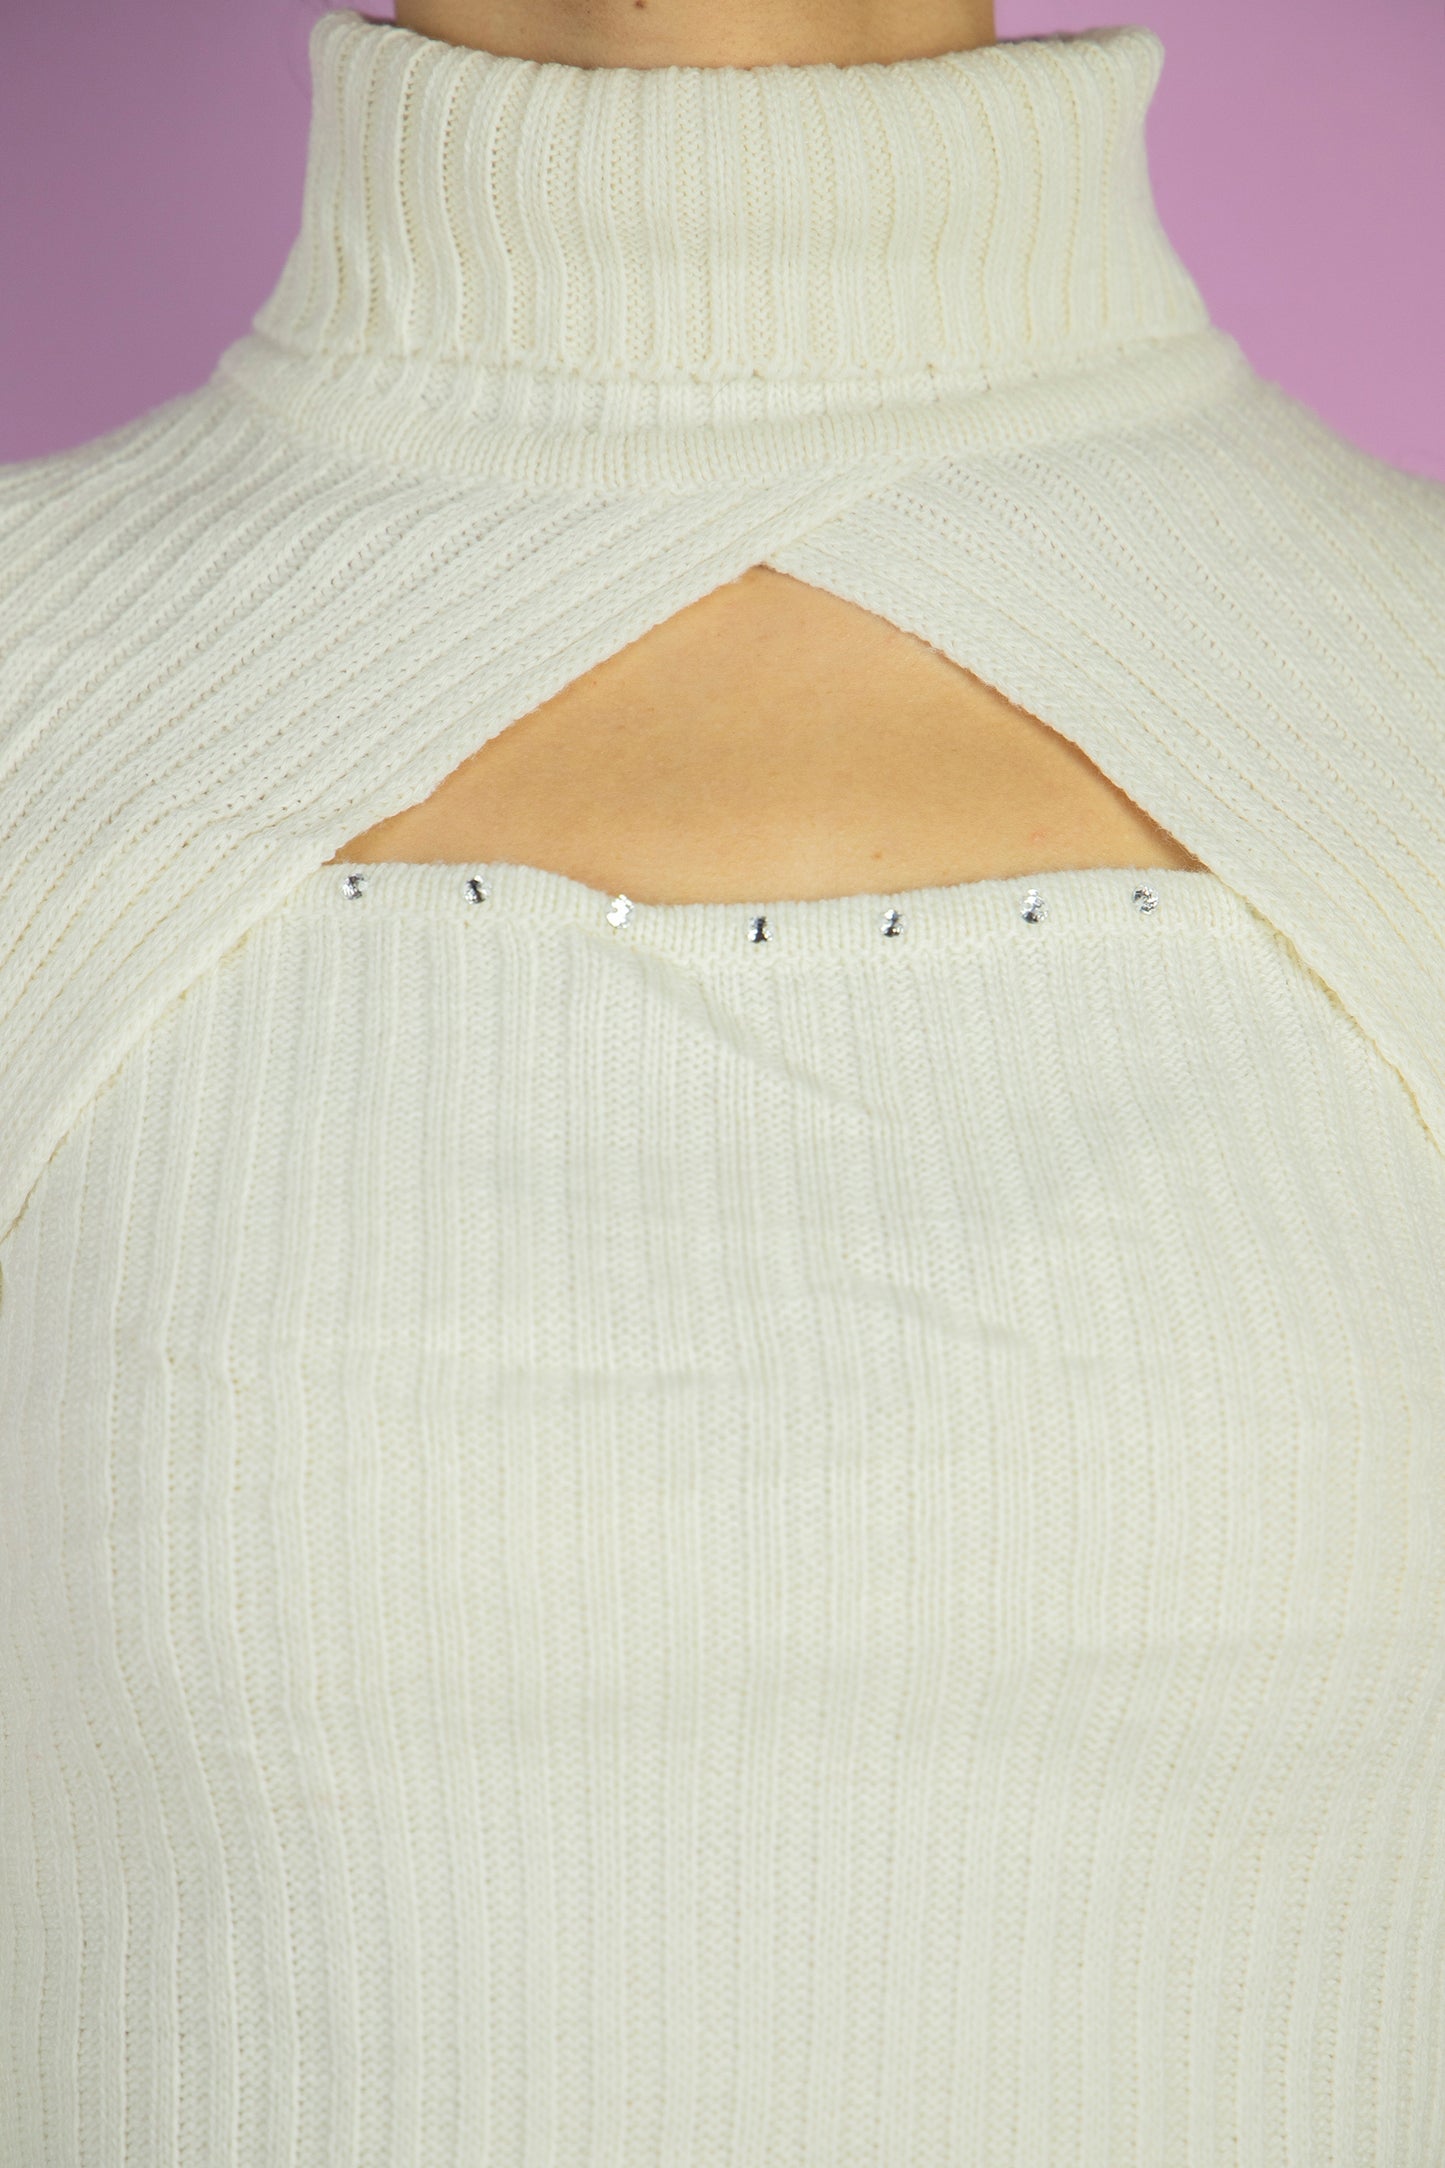 Vintage 90's White Cut Out Sweater - M